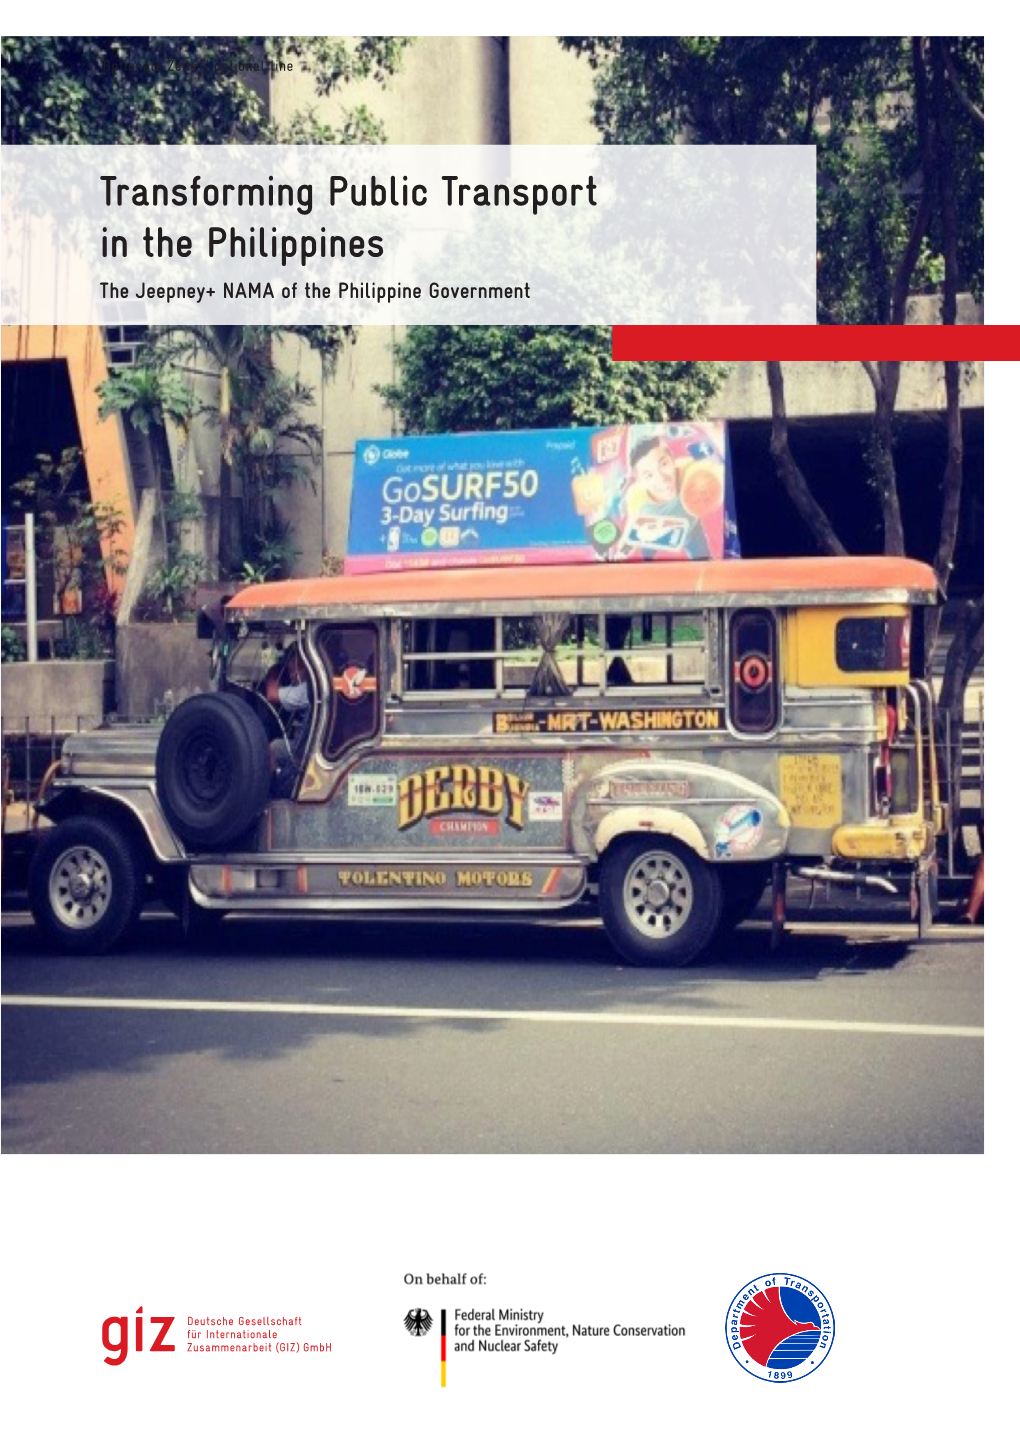 Transforming Public Transport in the Philippines